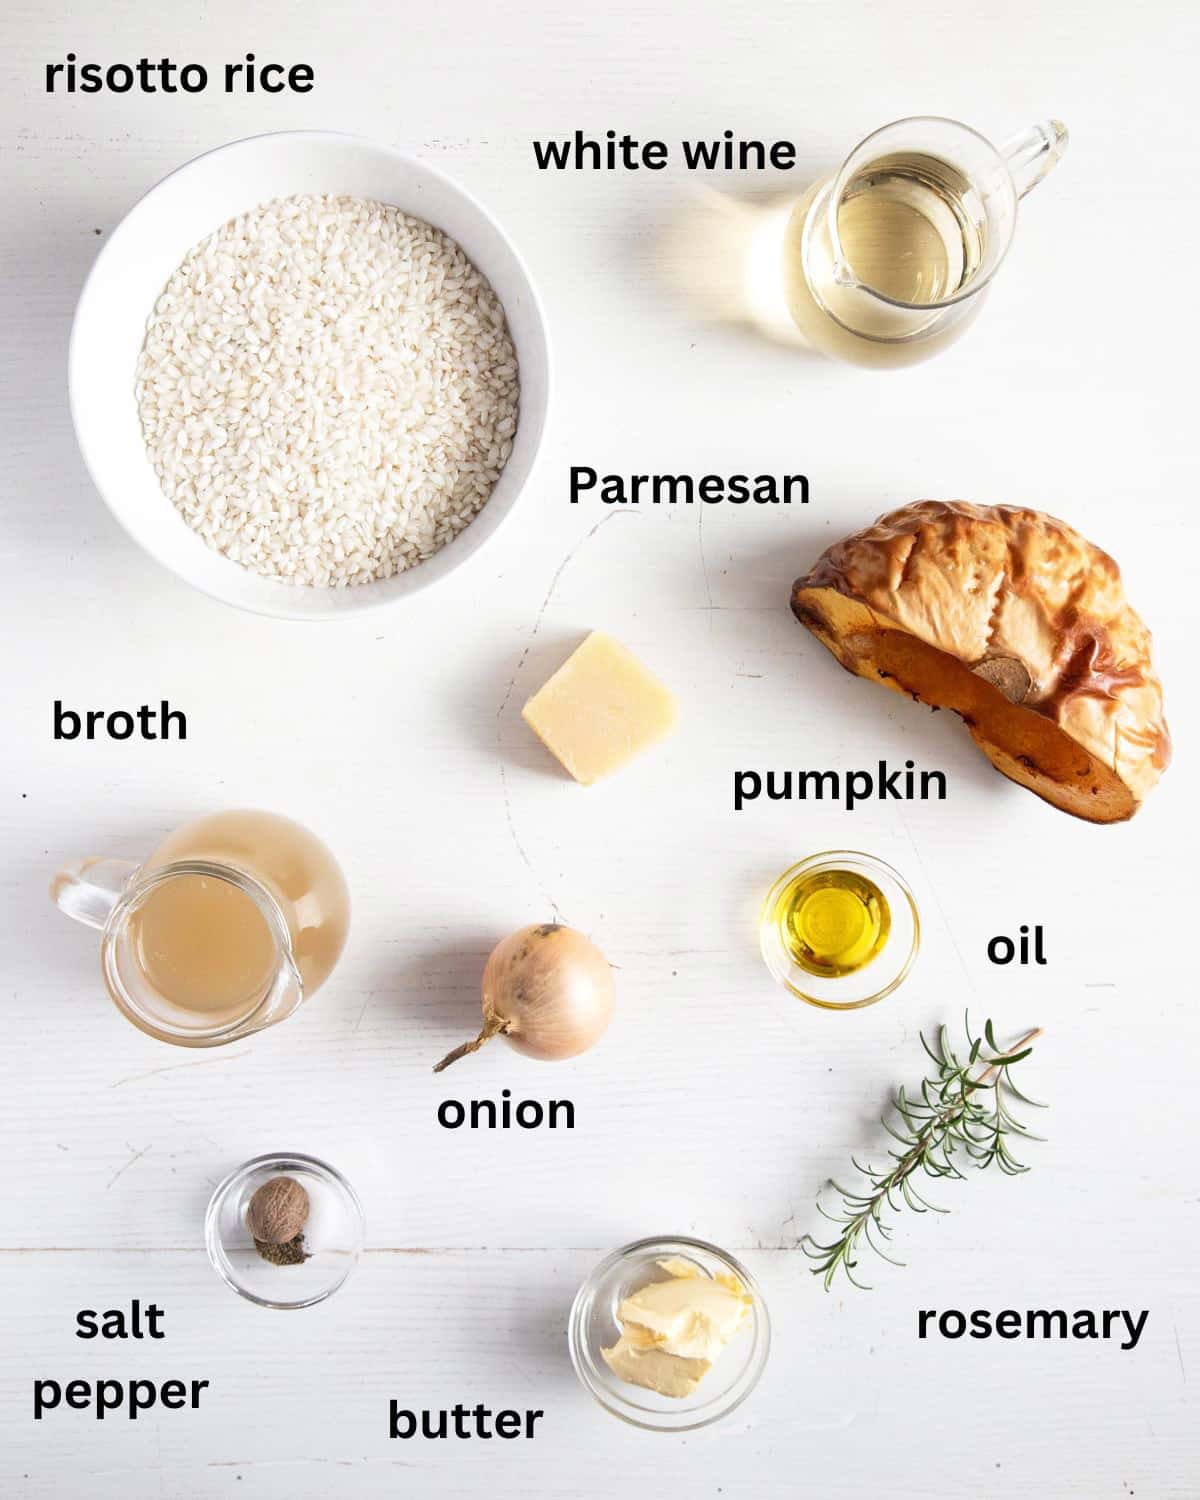 listed ingredients for making risotto with pumpkin and parmesan.